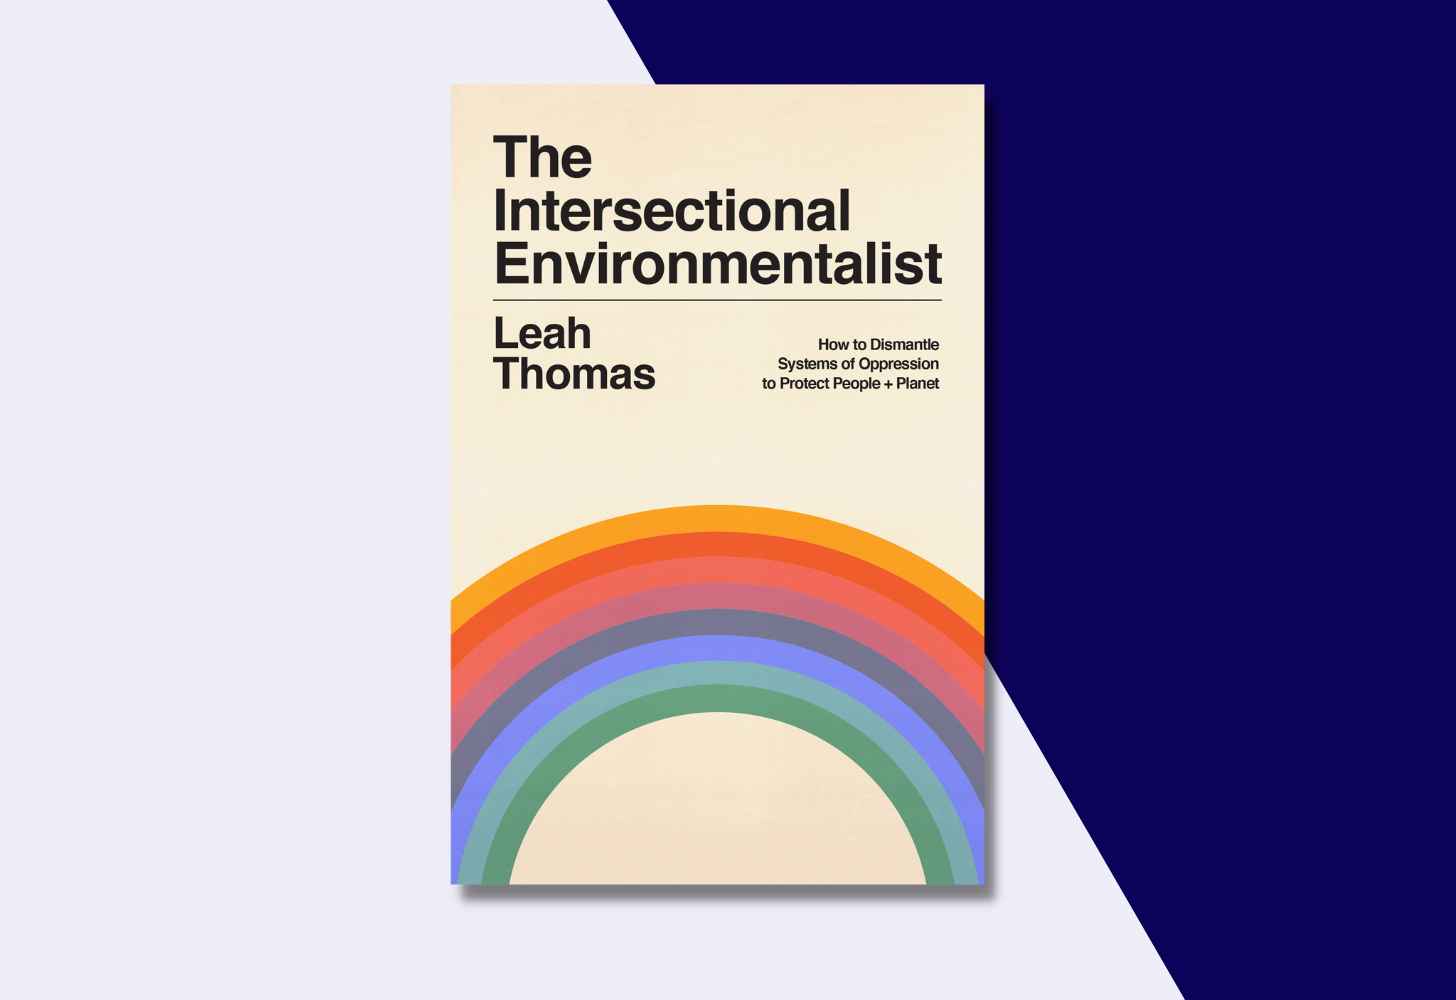 The Cover Of “The Intersectional Environmentalist: How to Dismantle Systems of Oppression to Protect People + Planet” by Leah Thomas